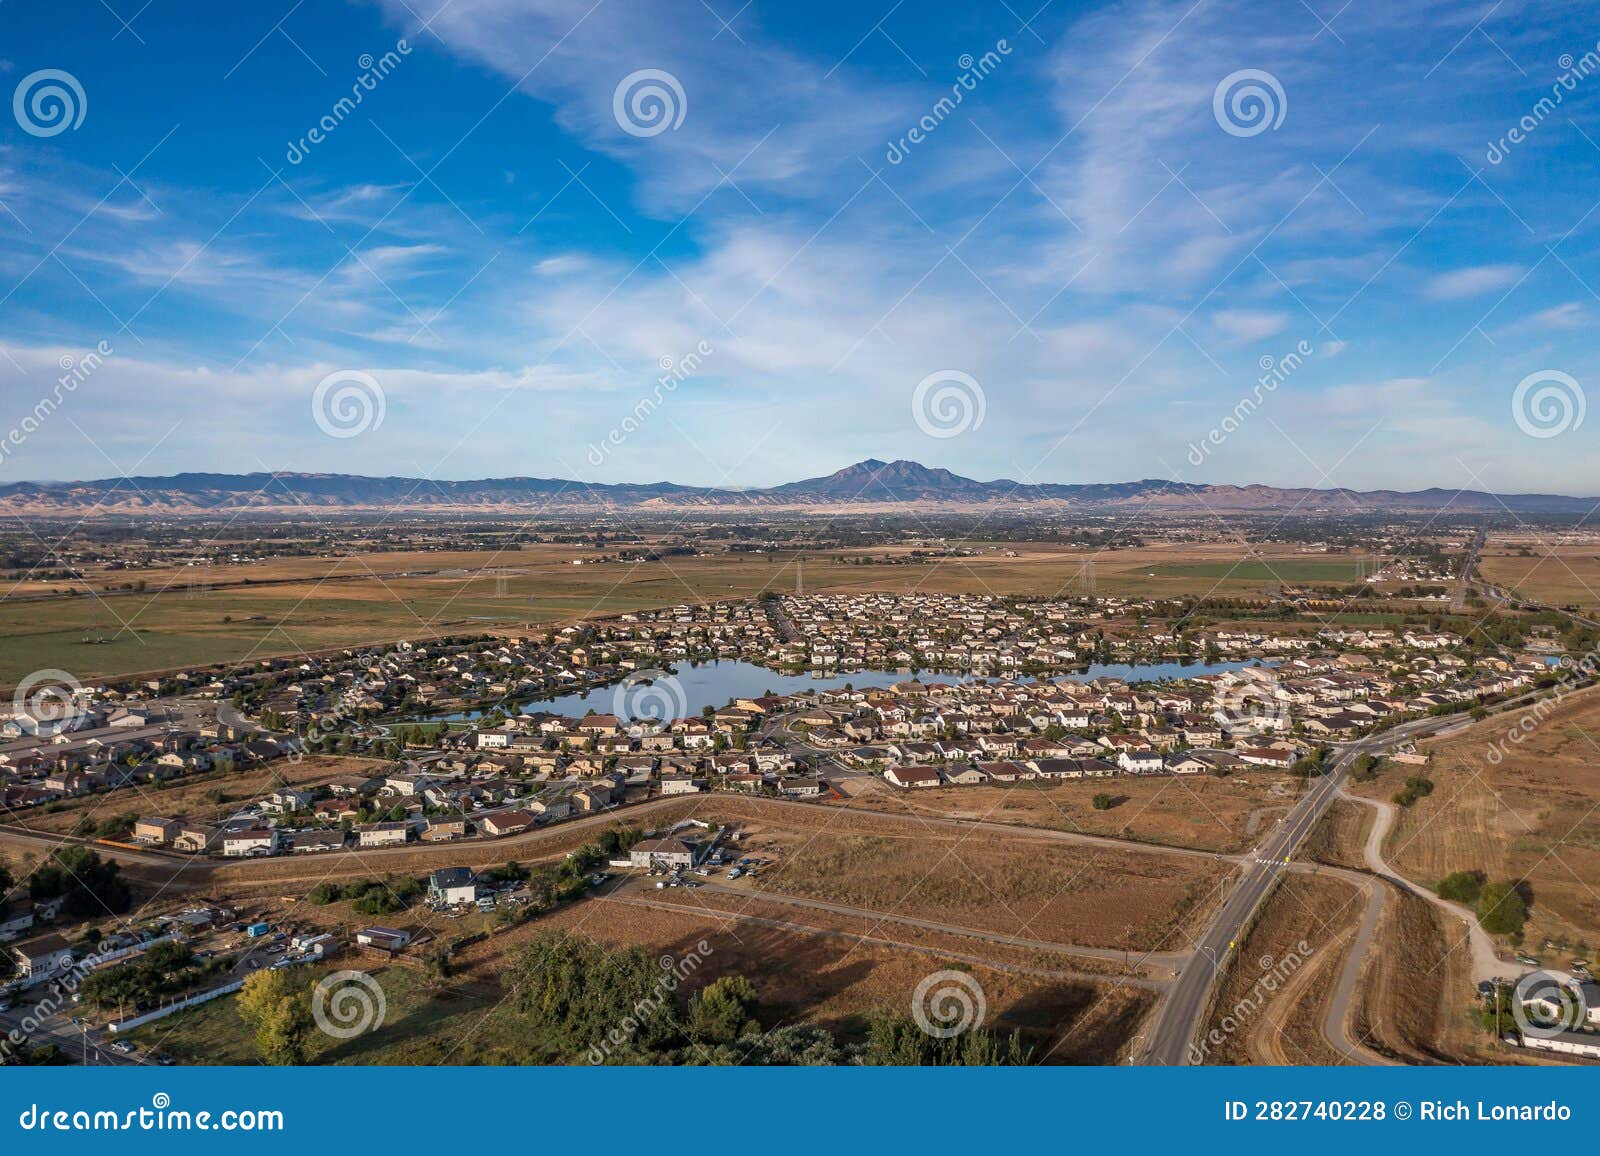 breathtaking drone imagery captures the idyllic summer lake community in oakley, california